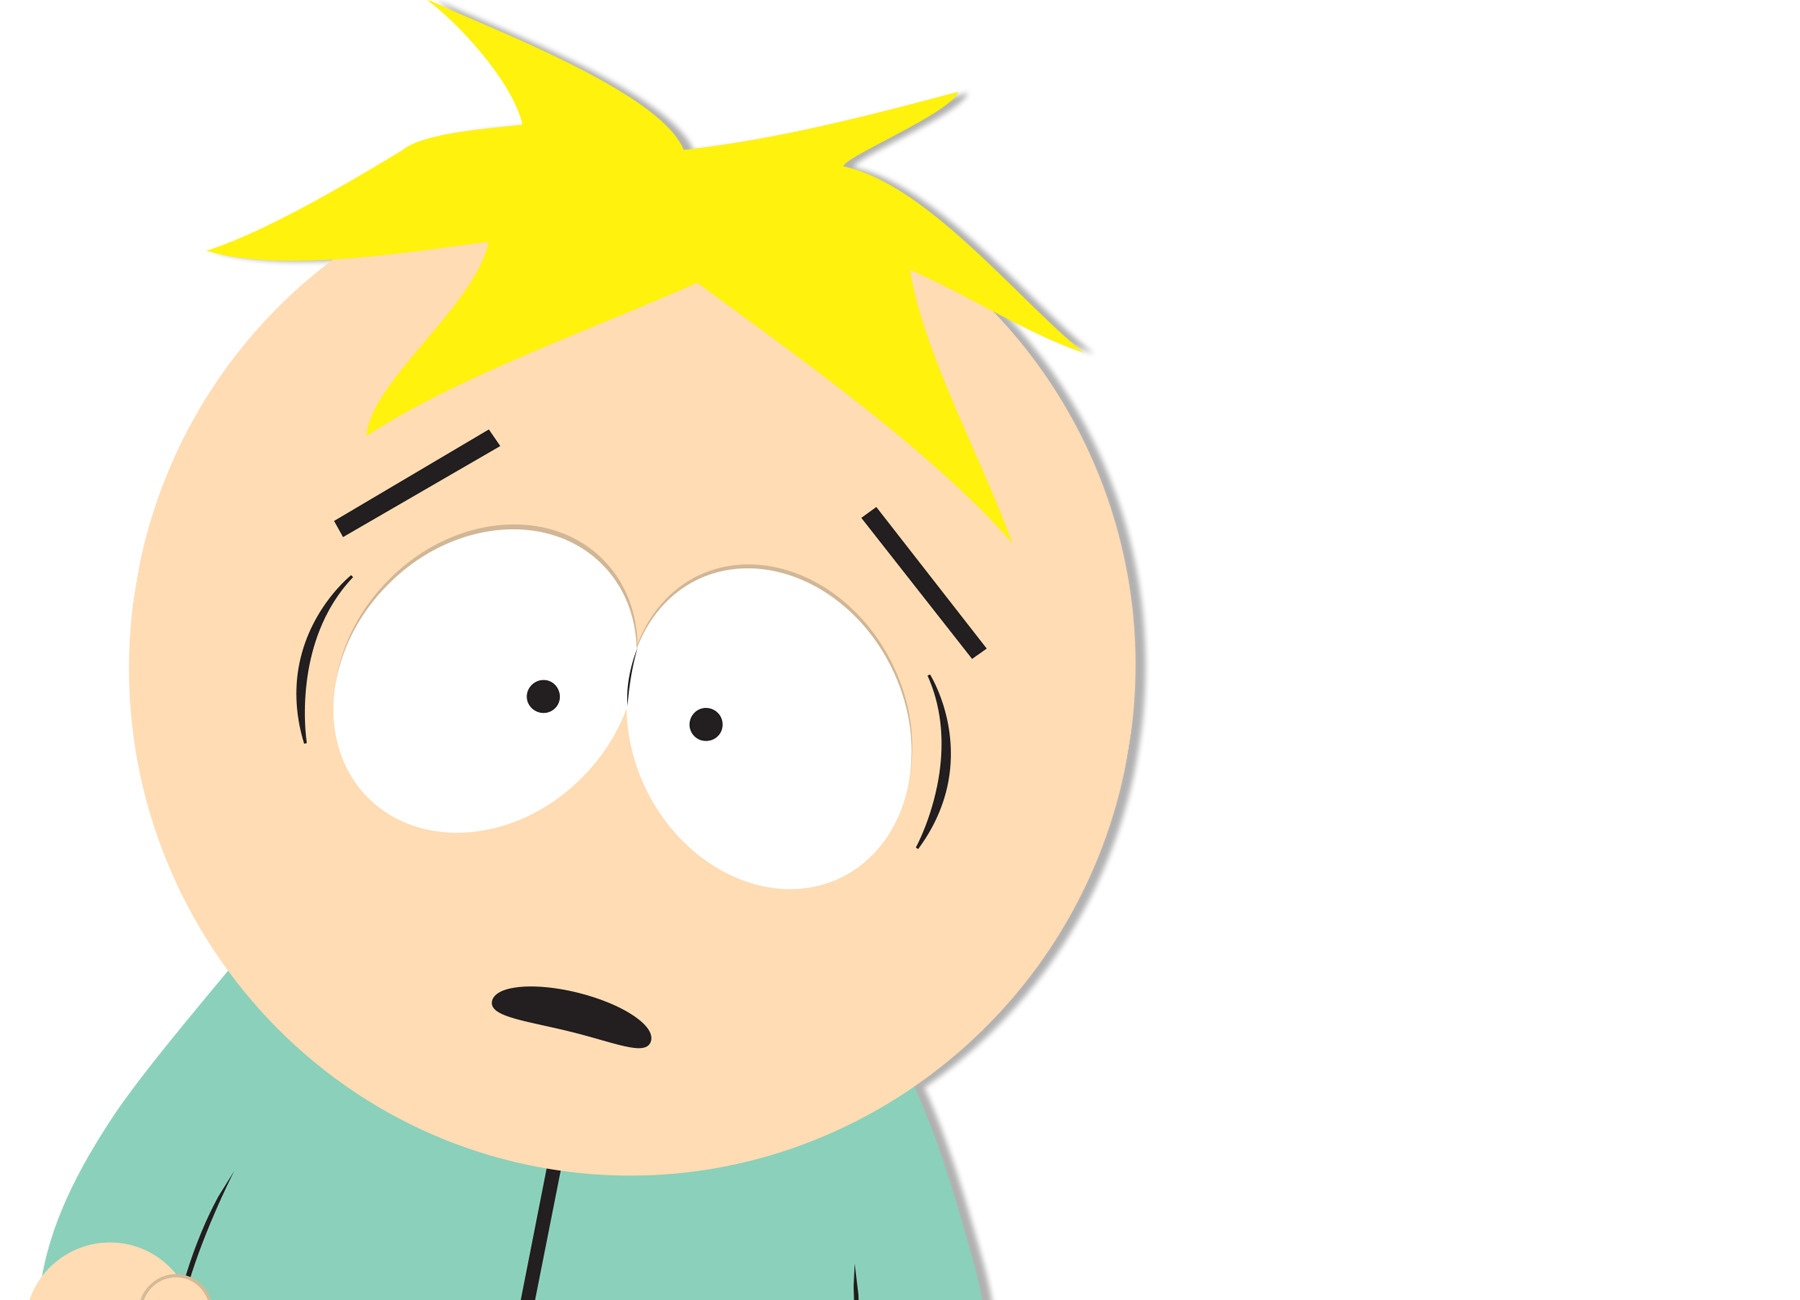 South Park: The Streaming Wars»  Butters south park, South park